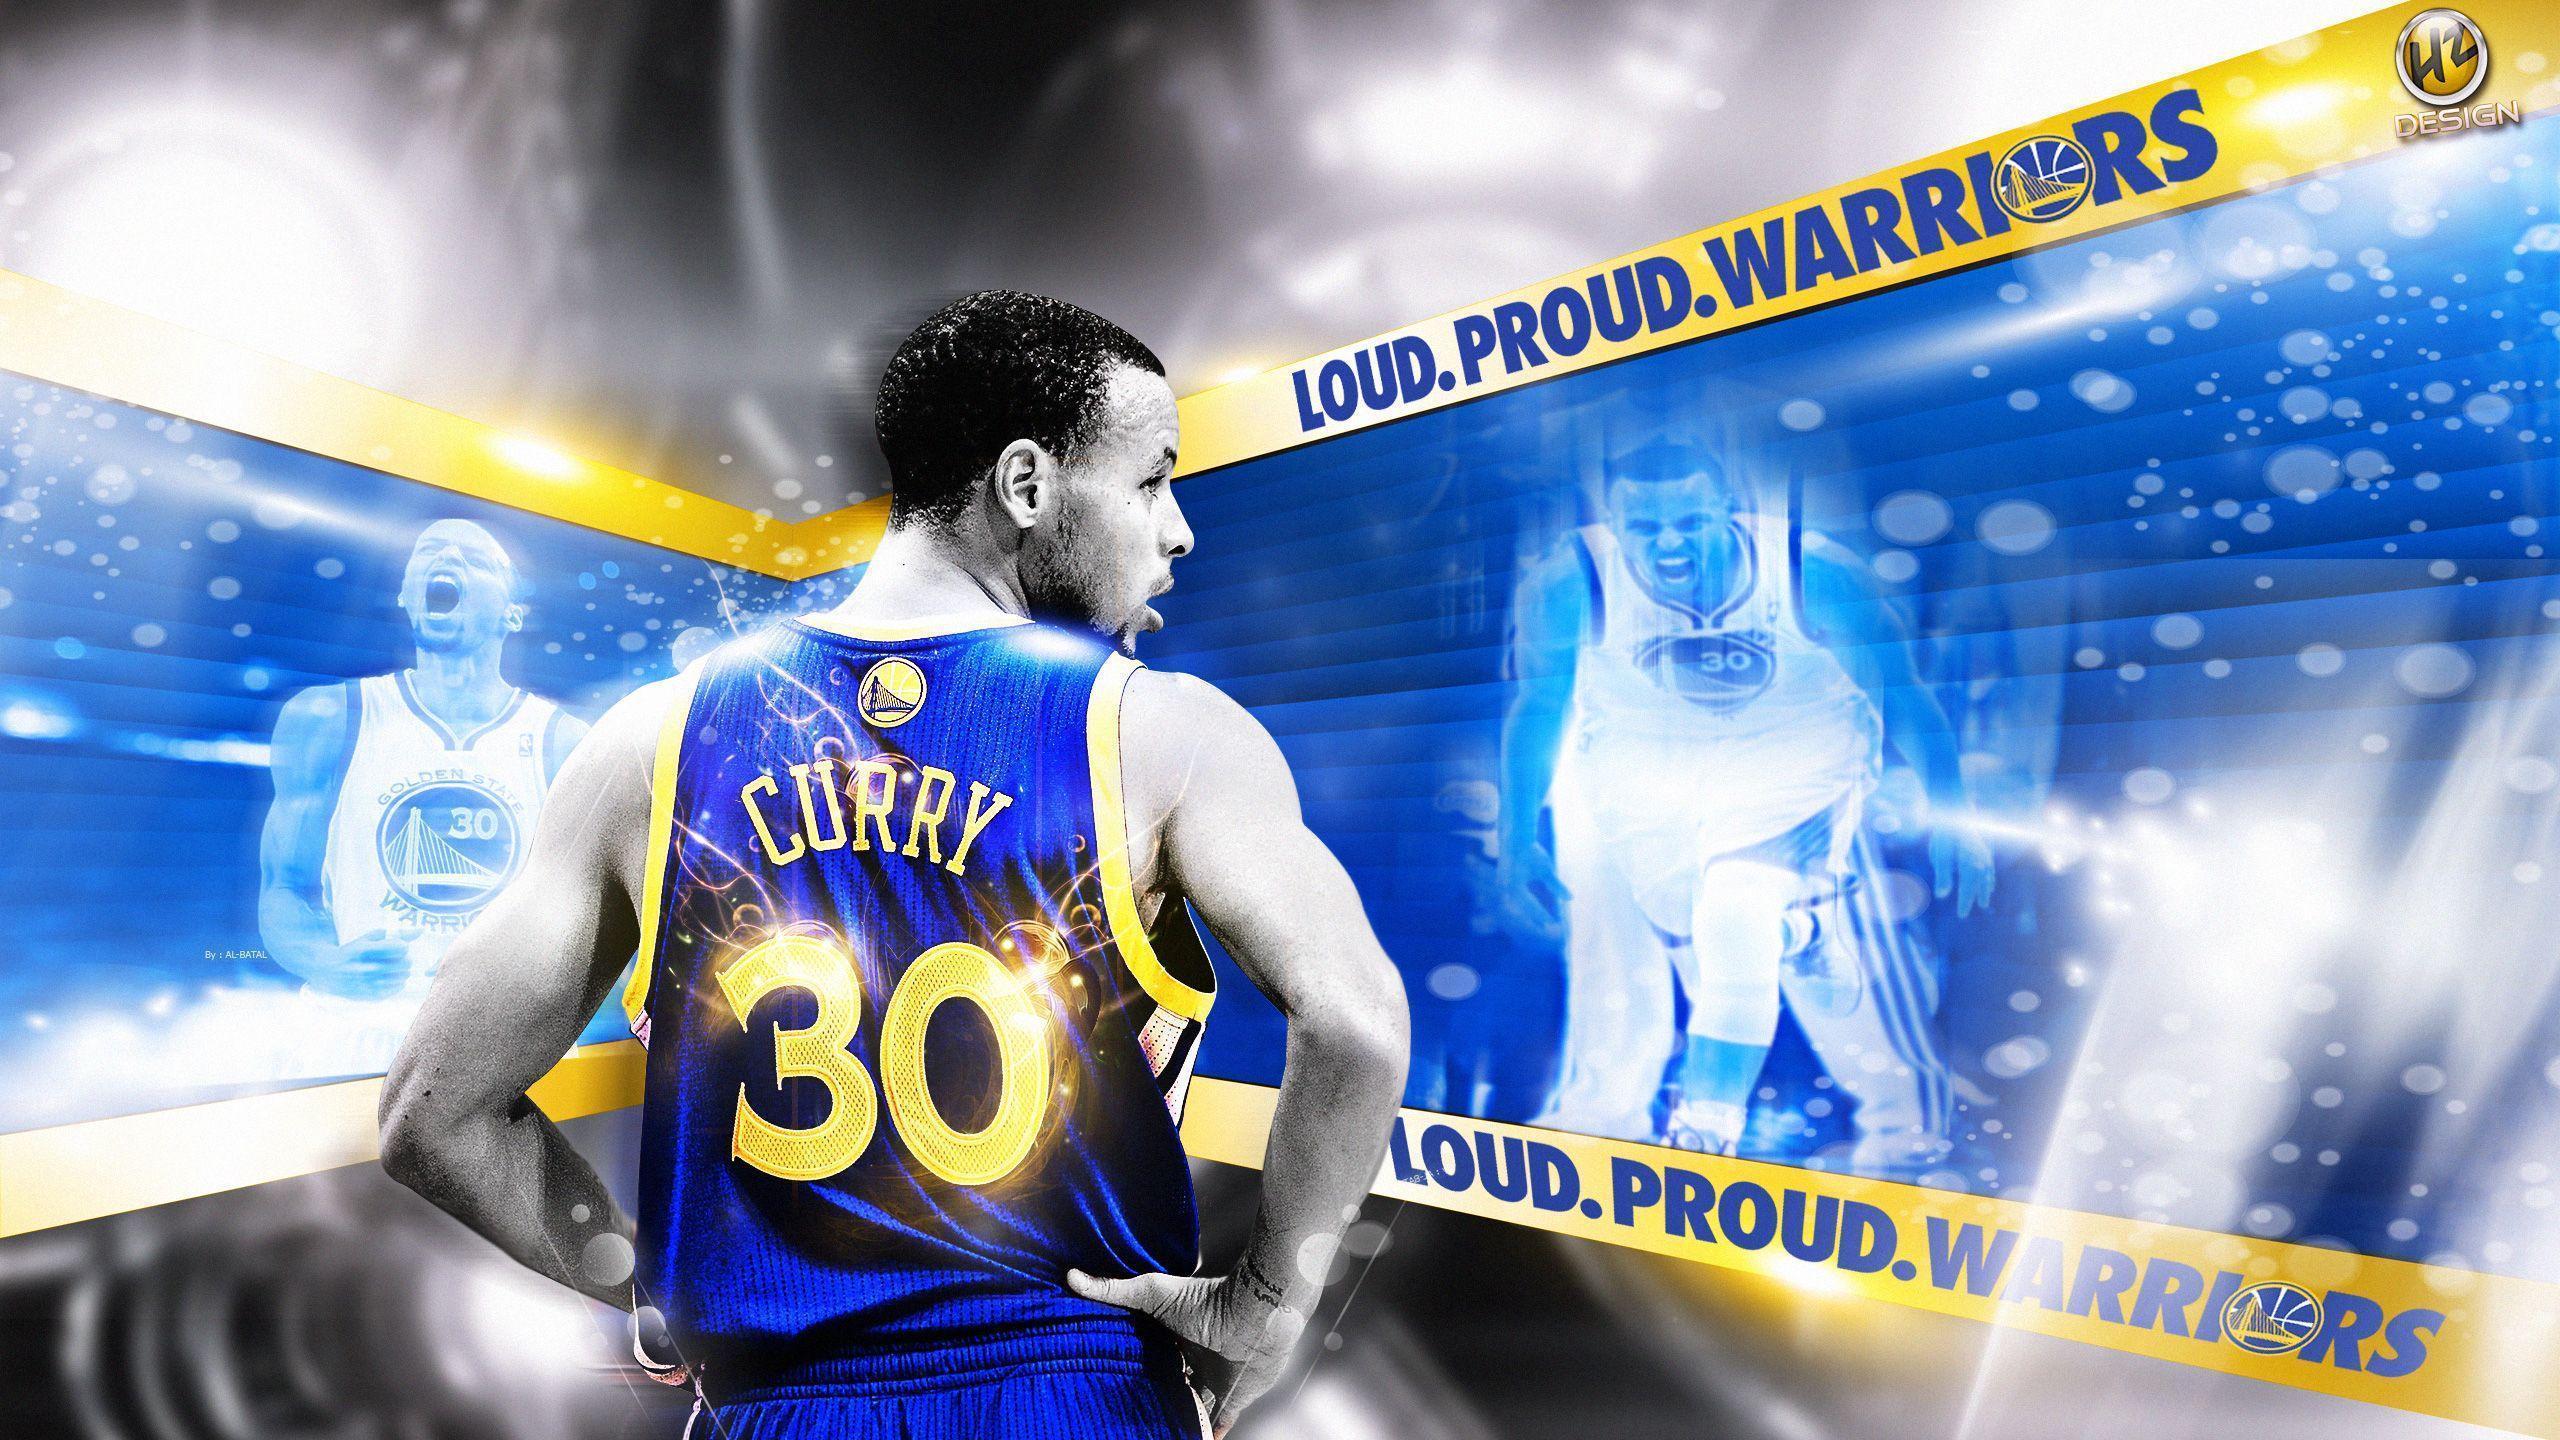 Stephen Curry background wallpaper. stephen curry wallpaper